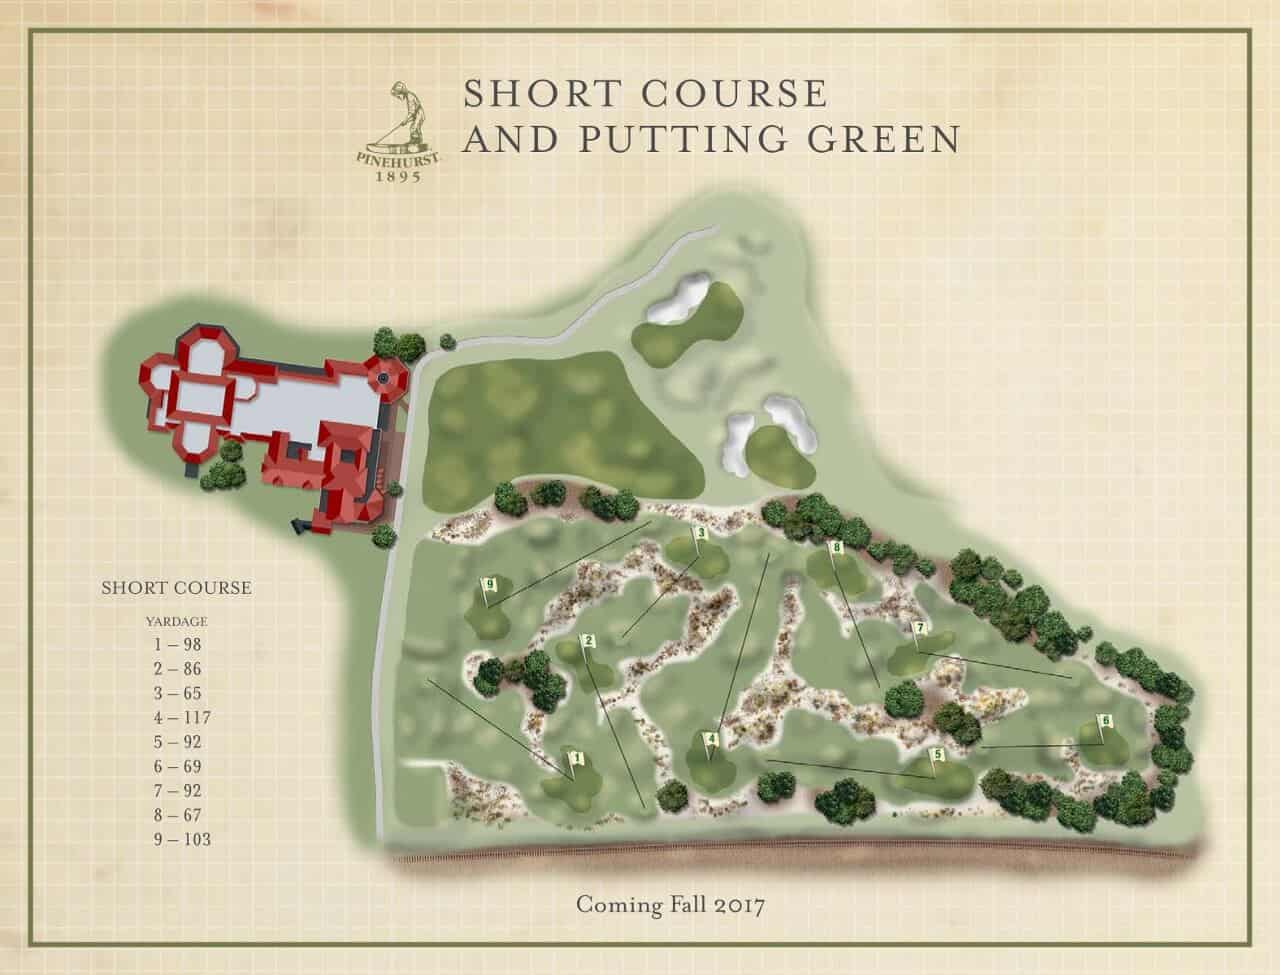 Pinehurst Resort and Country Club revealed Friday the routing and design of its new short course, which will break ground in early May and is scheduled to open this fall.